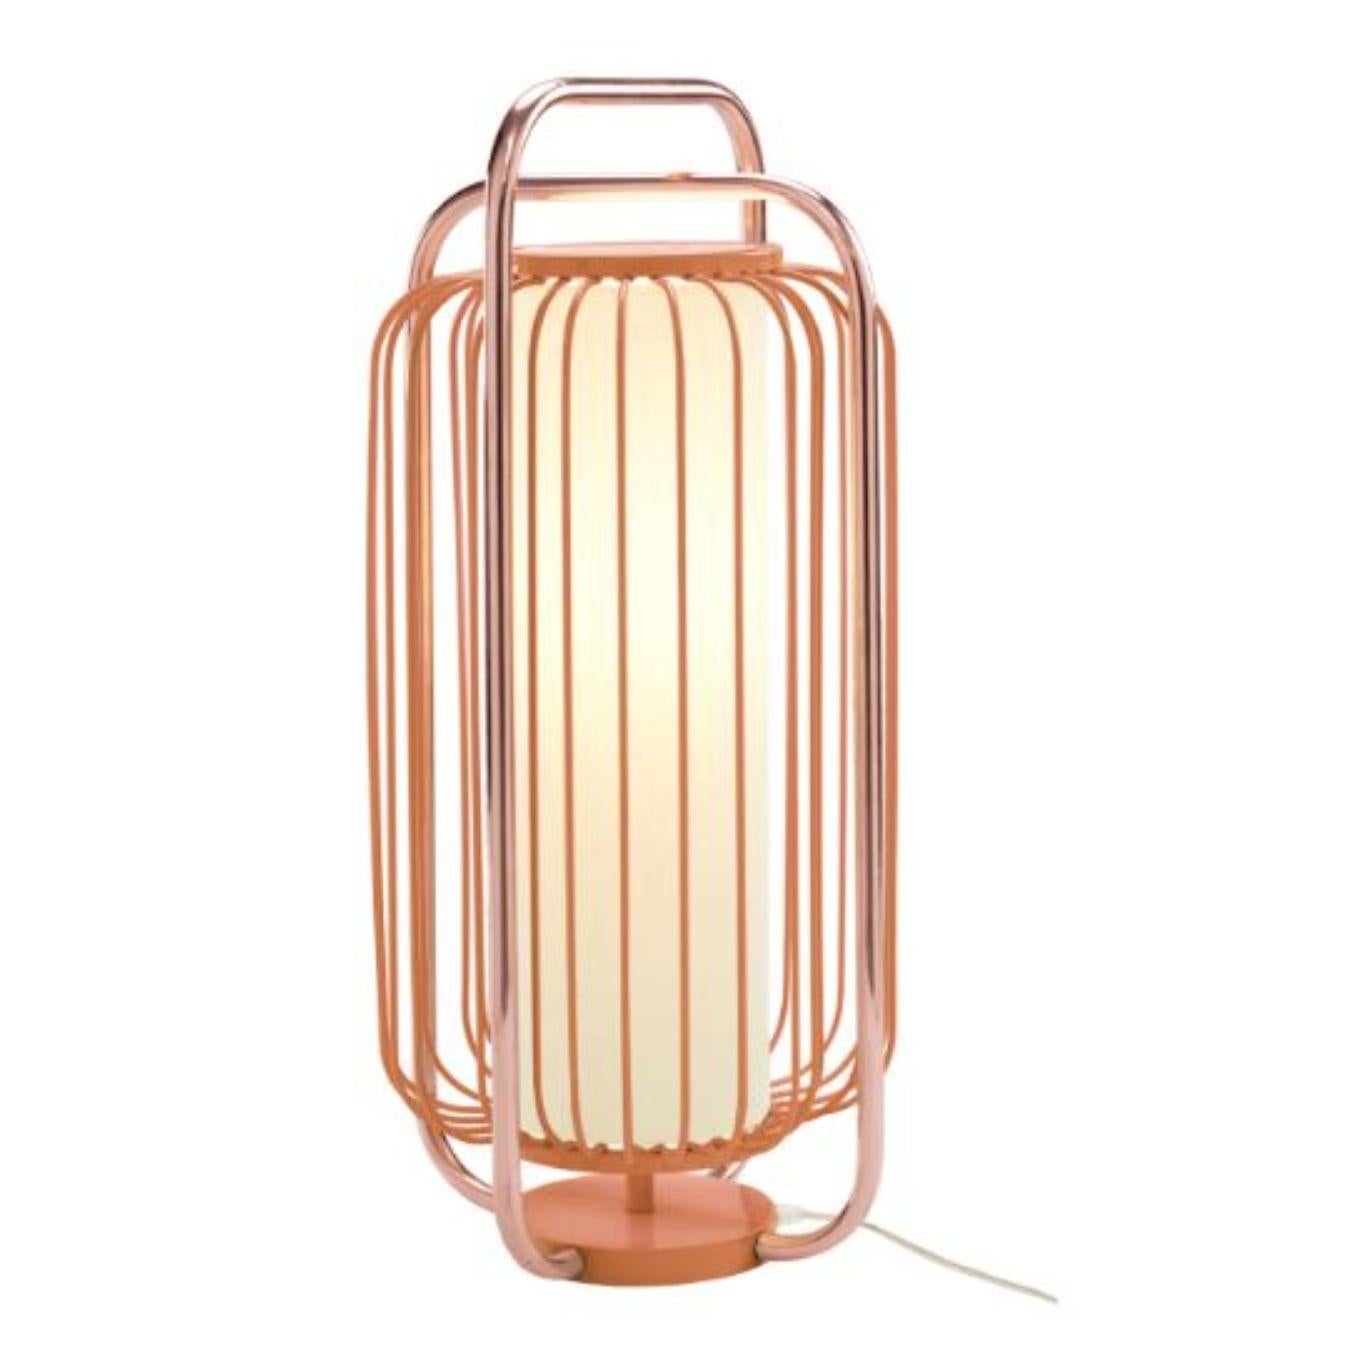 Copper and Salmon Jules table lamp by Dooq.
Dimensions: W 30 x D 30 x H 63 cm.
Materials: lacquered metal, polished or brushed metal, copper.
abat-jour: cotton.
Also available in different colours and